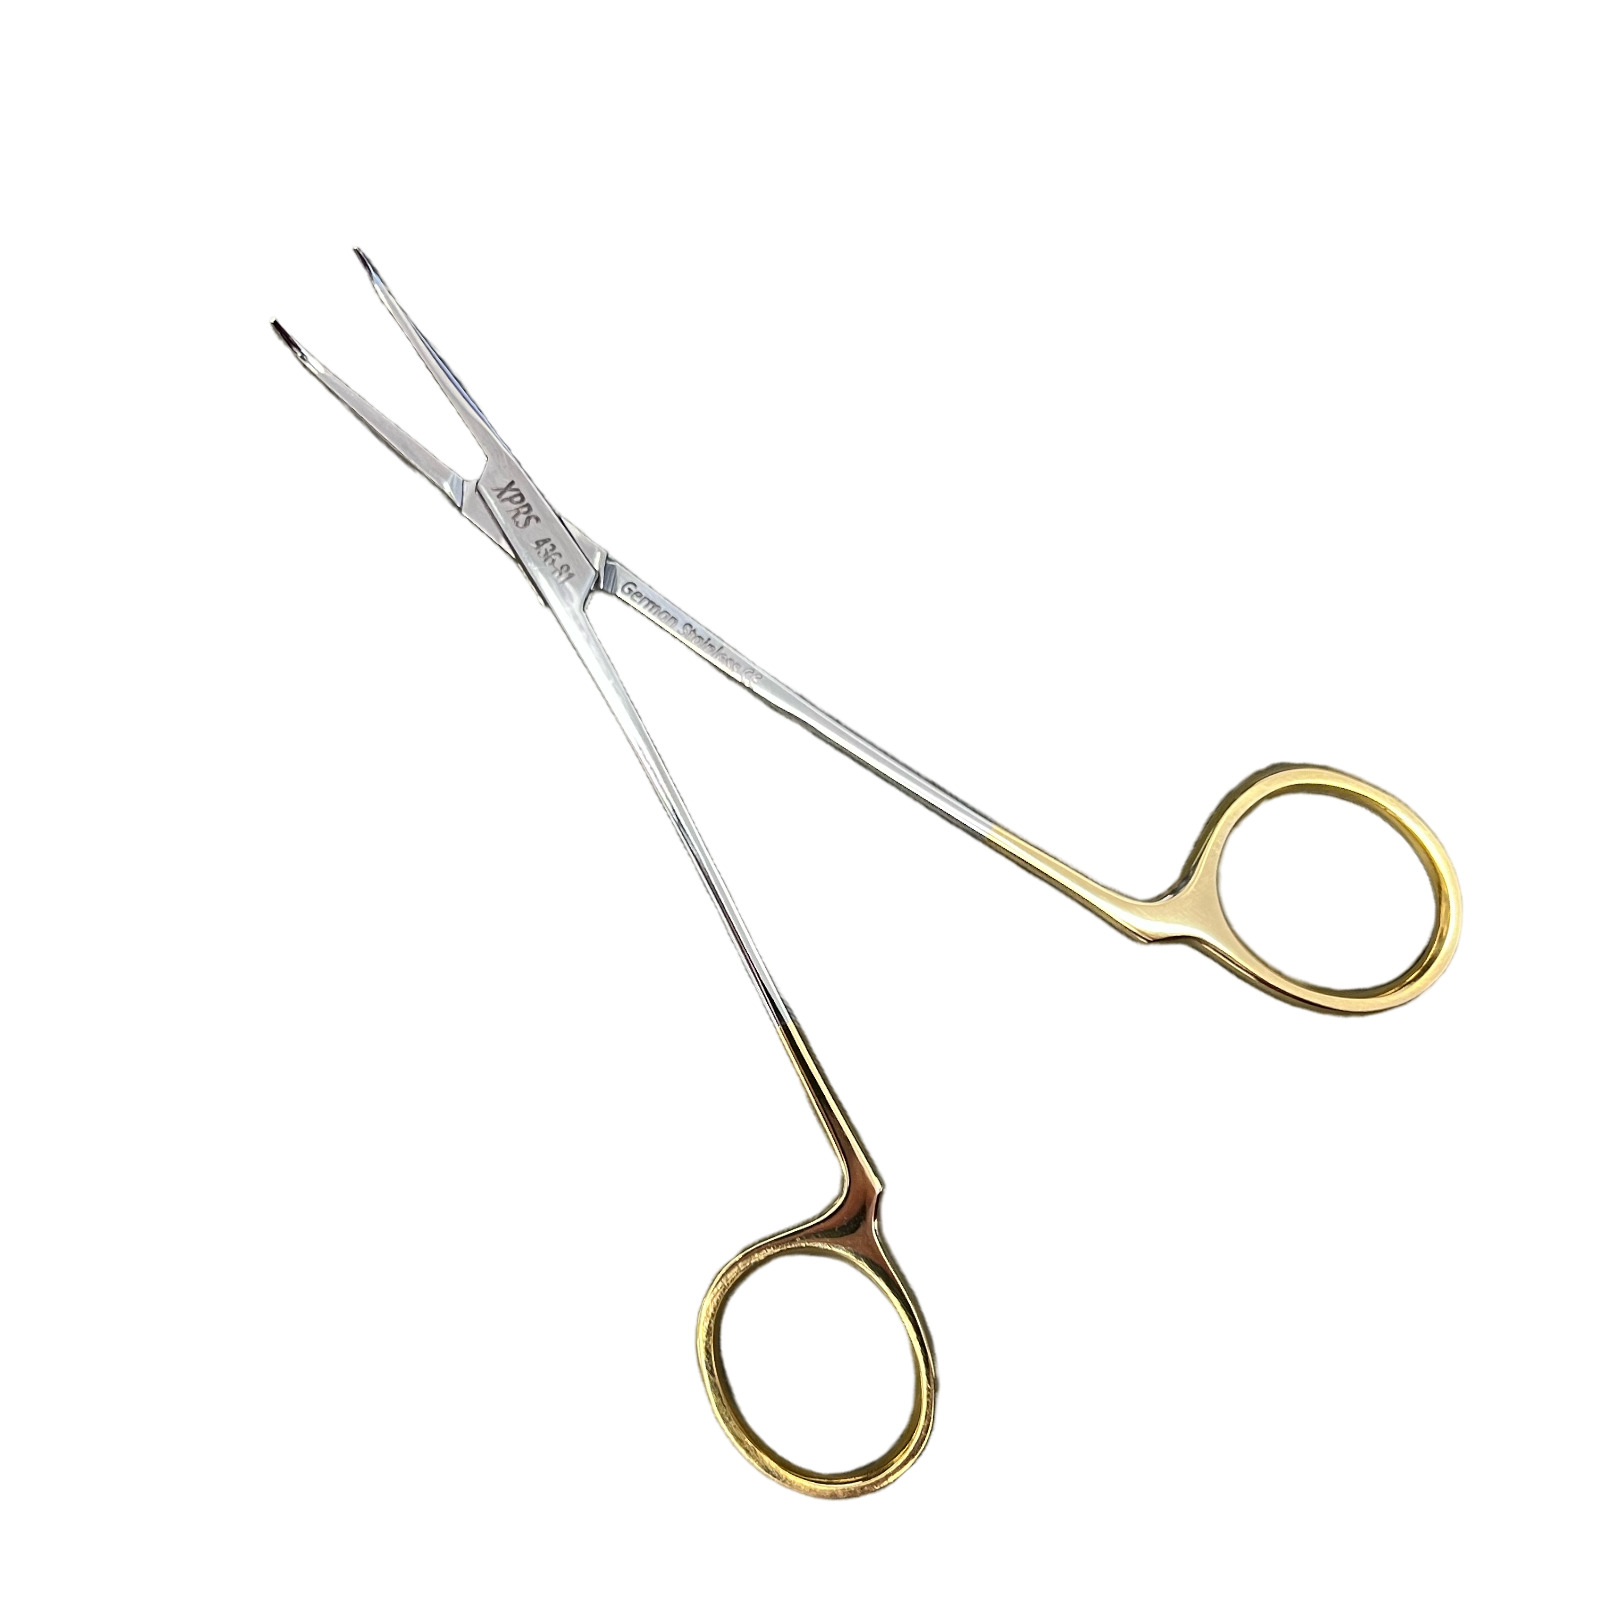 Set of 2 McCabe Facial Nerve Dissector, 5.5\